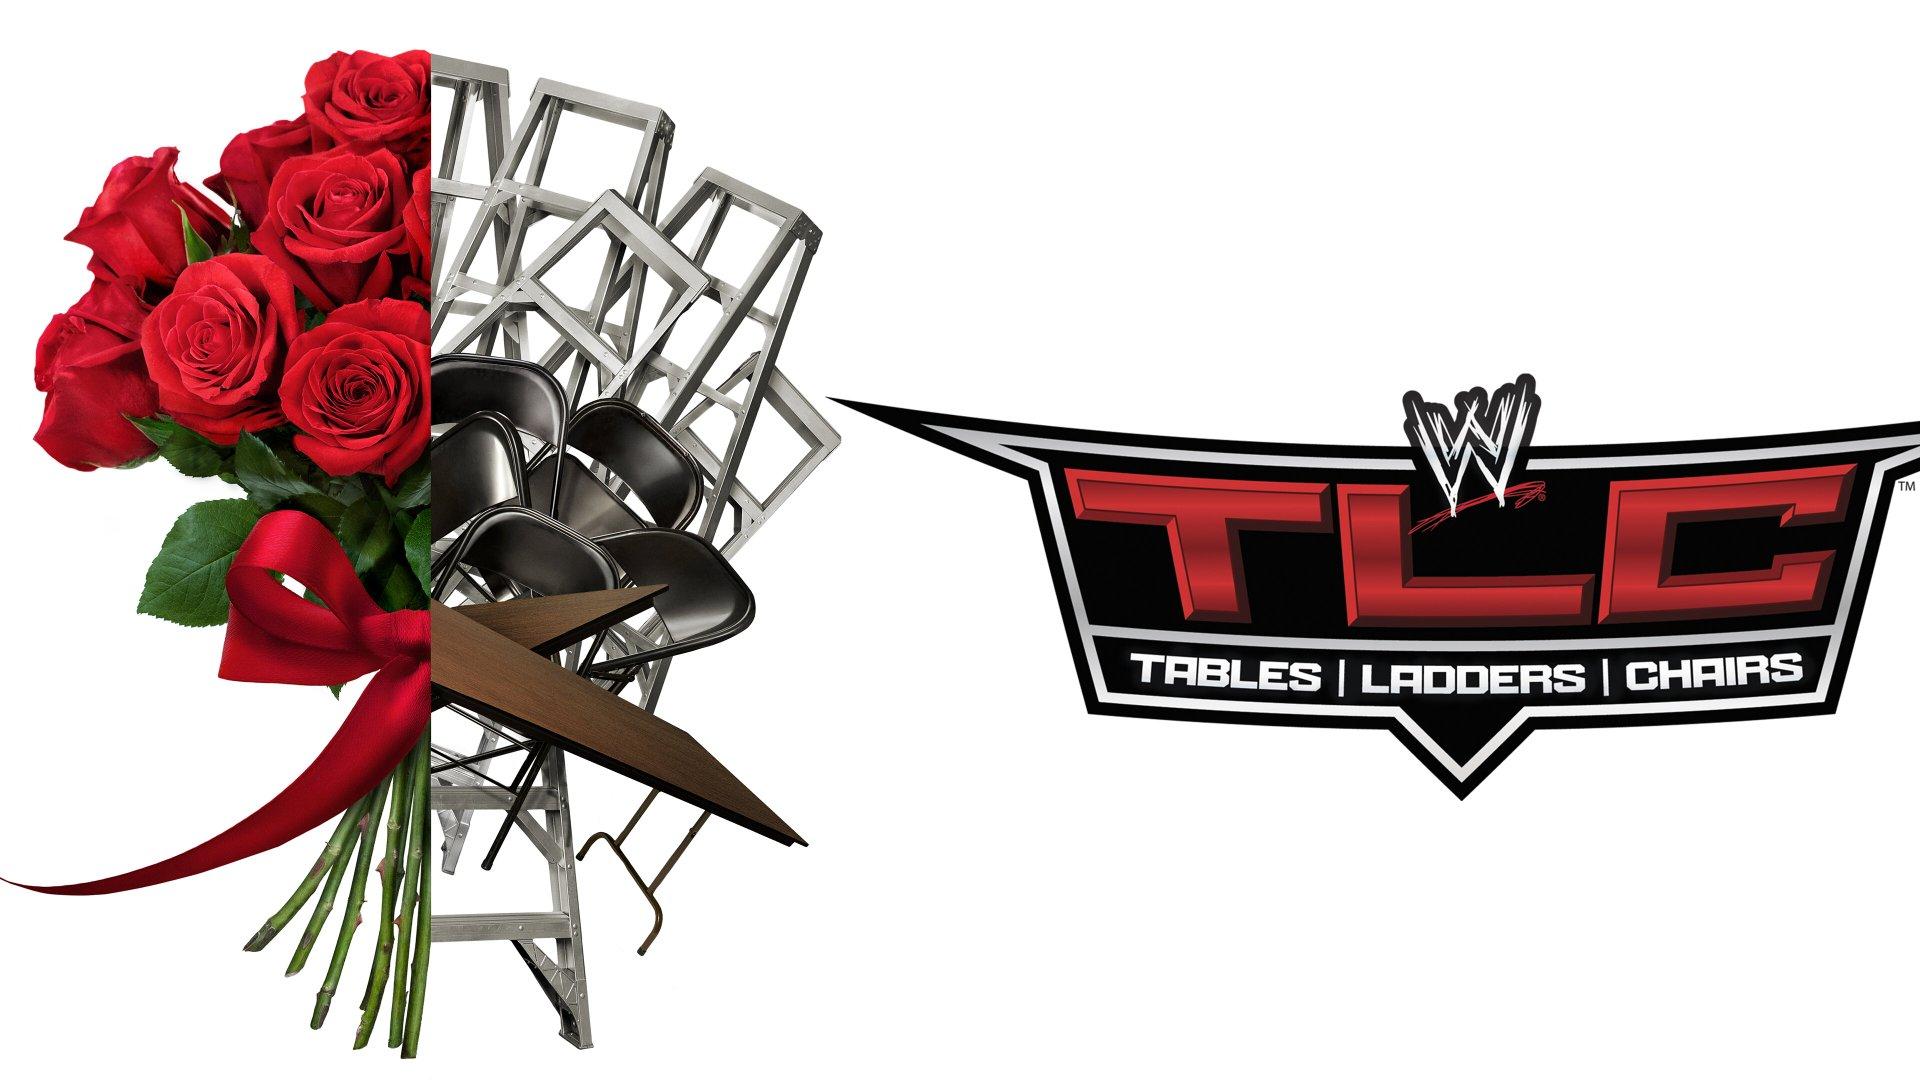 WWE TLC - Tables, Ladders & Chairs 2013